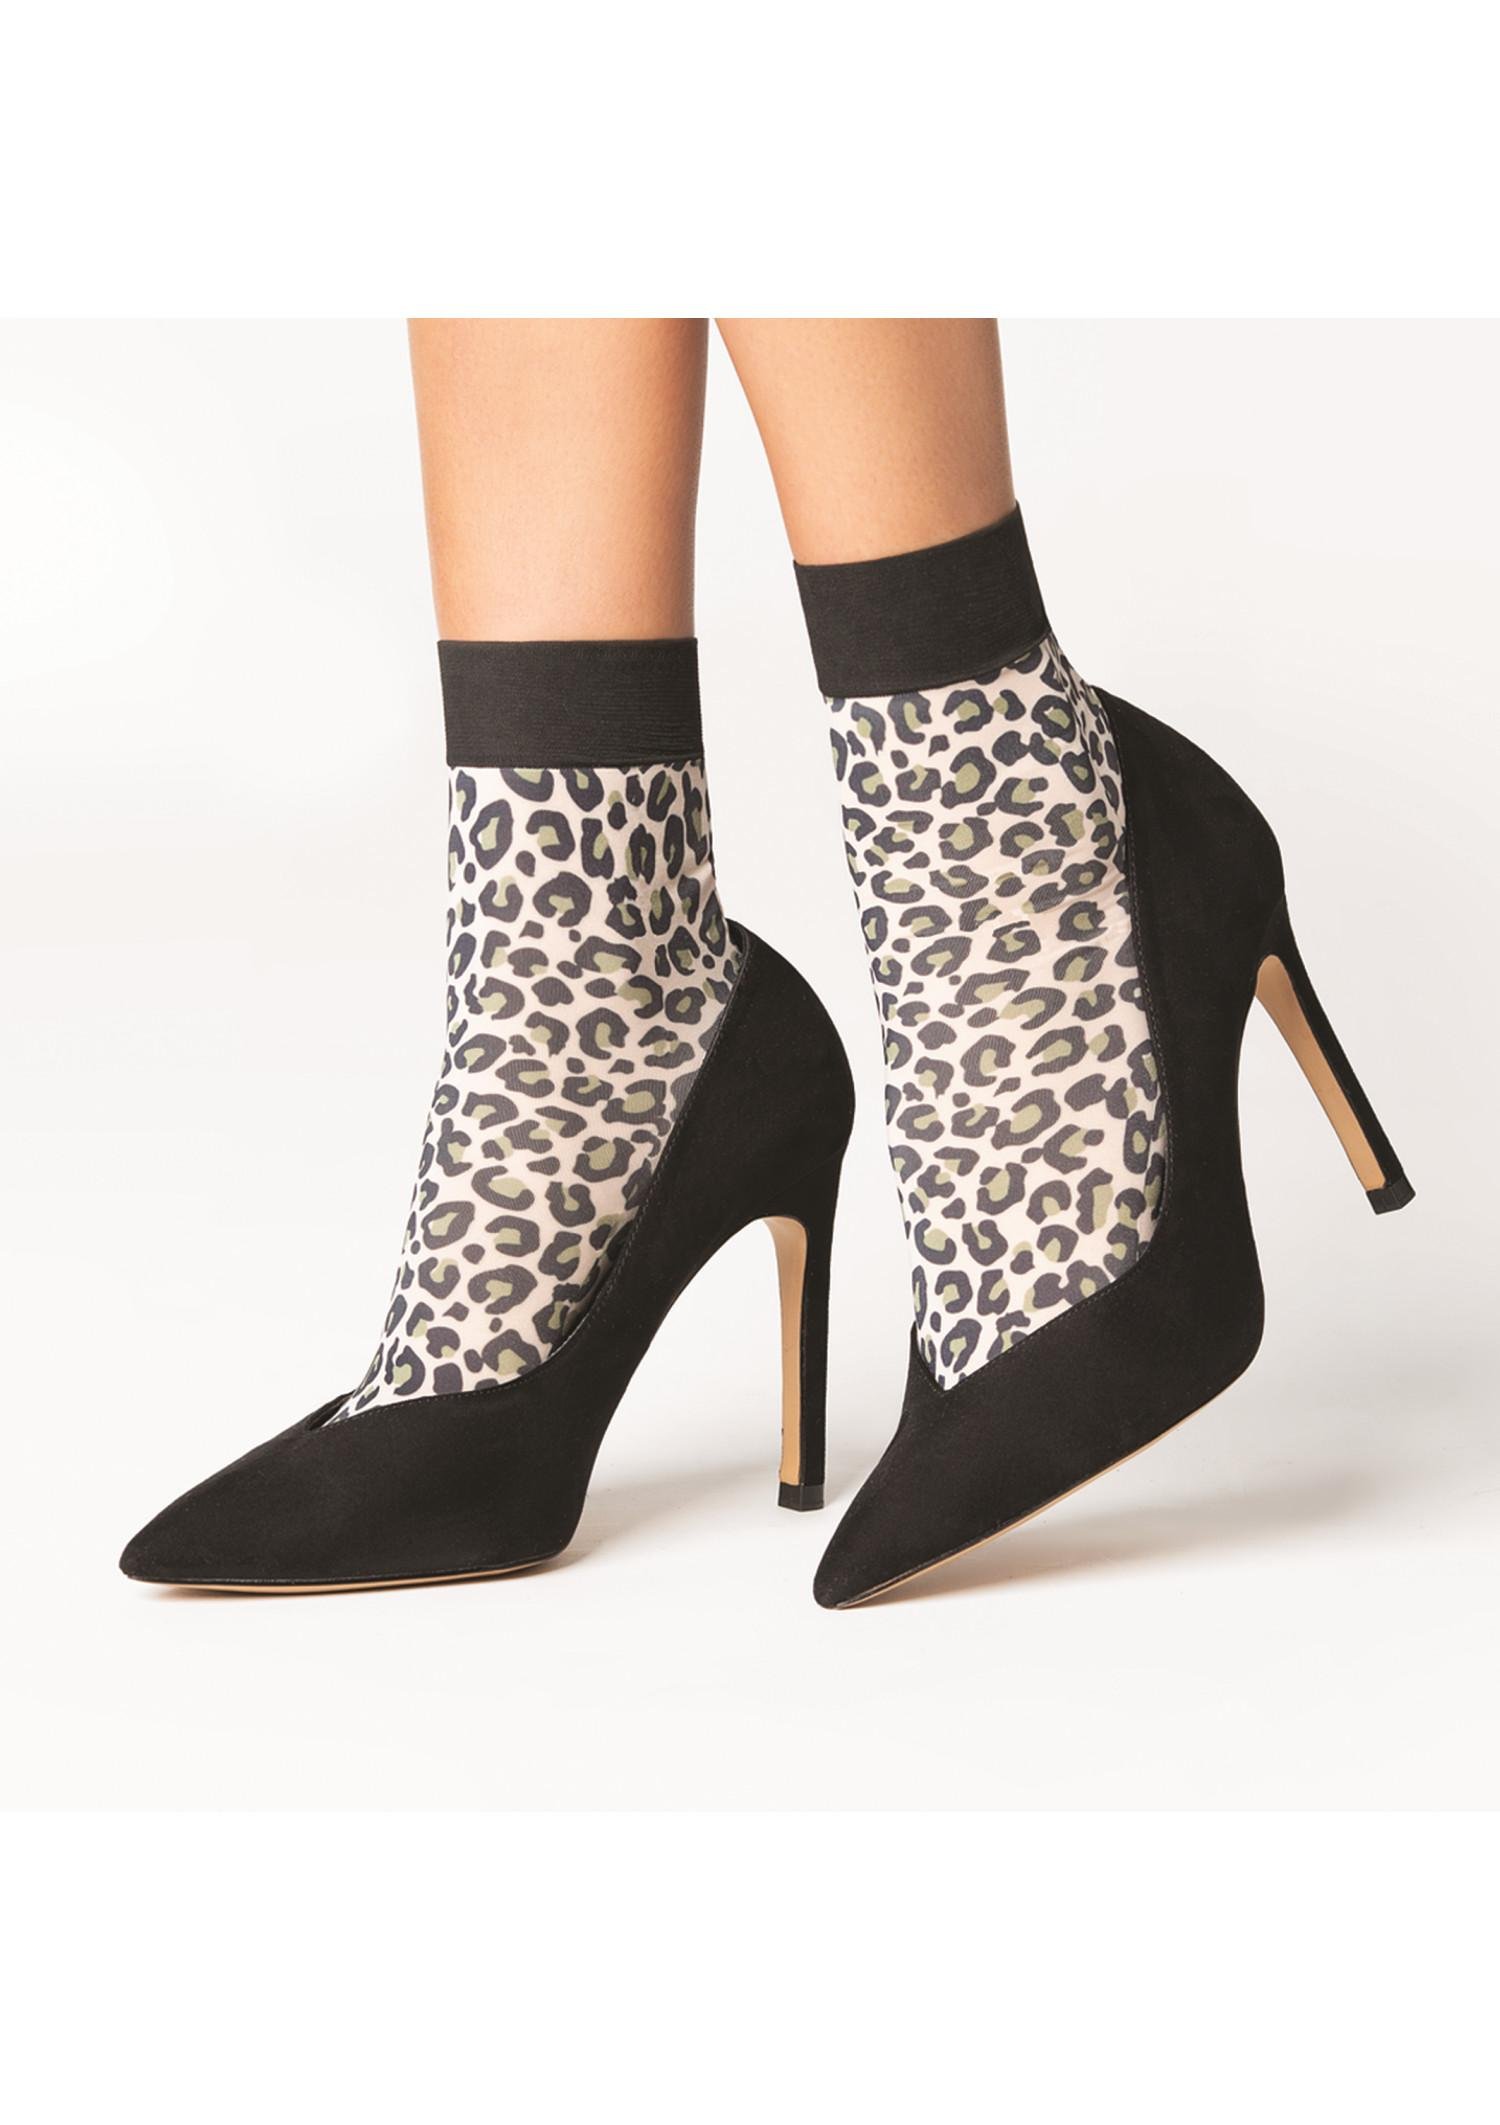 Sexy Panther Marilyn Women's Wide-Ribbed Leopard Print Socks | Marilyn ®